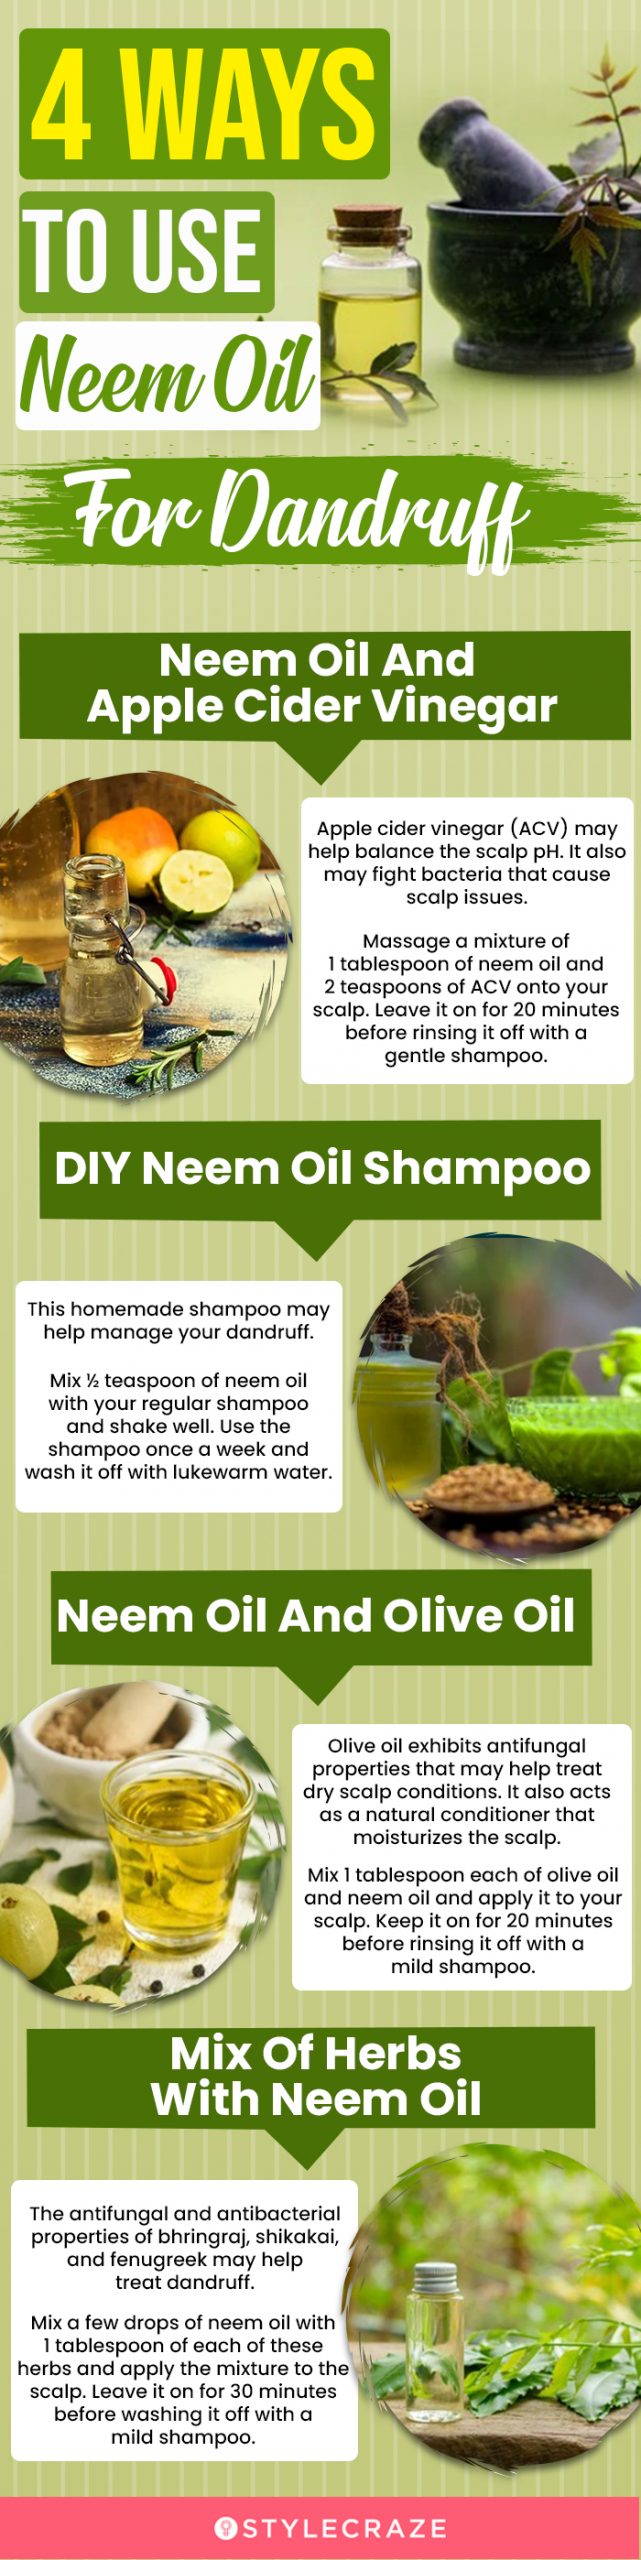 4 ways to use neem oil for dandruff (infographic)